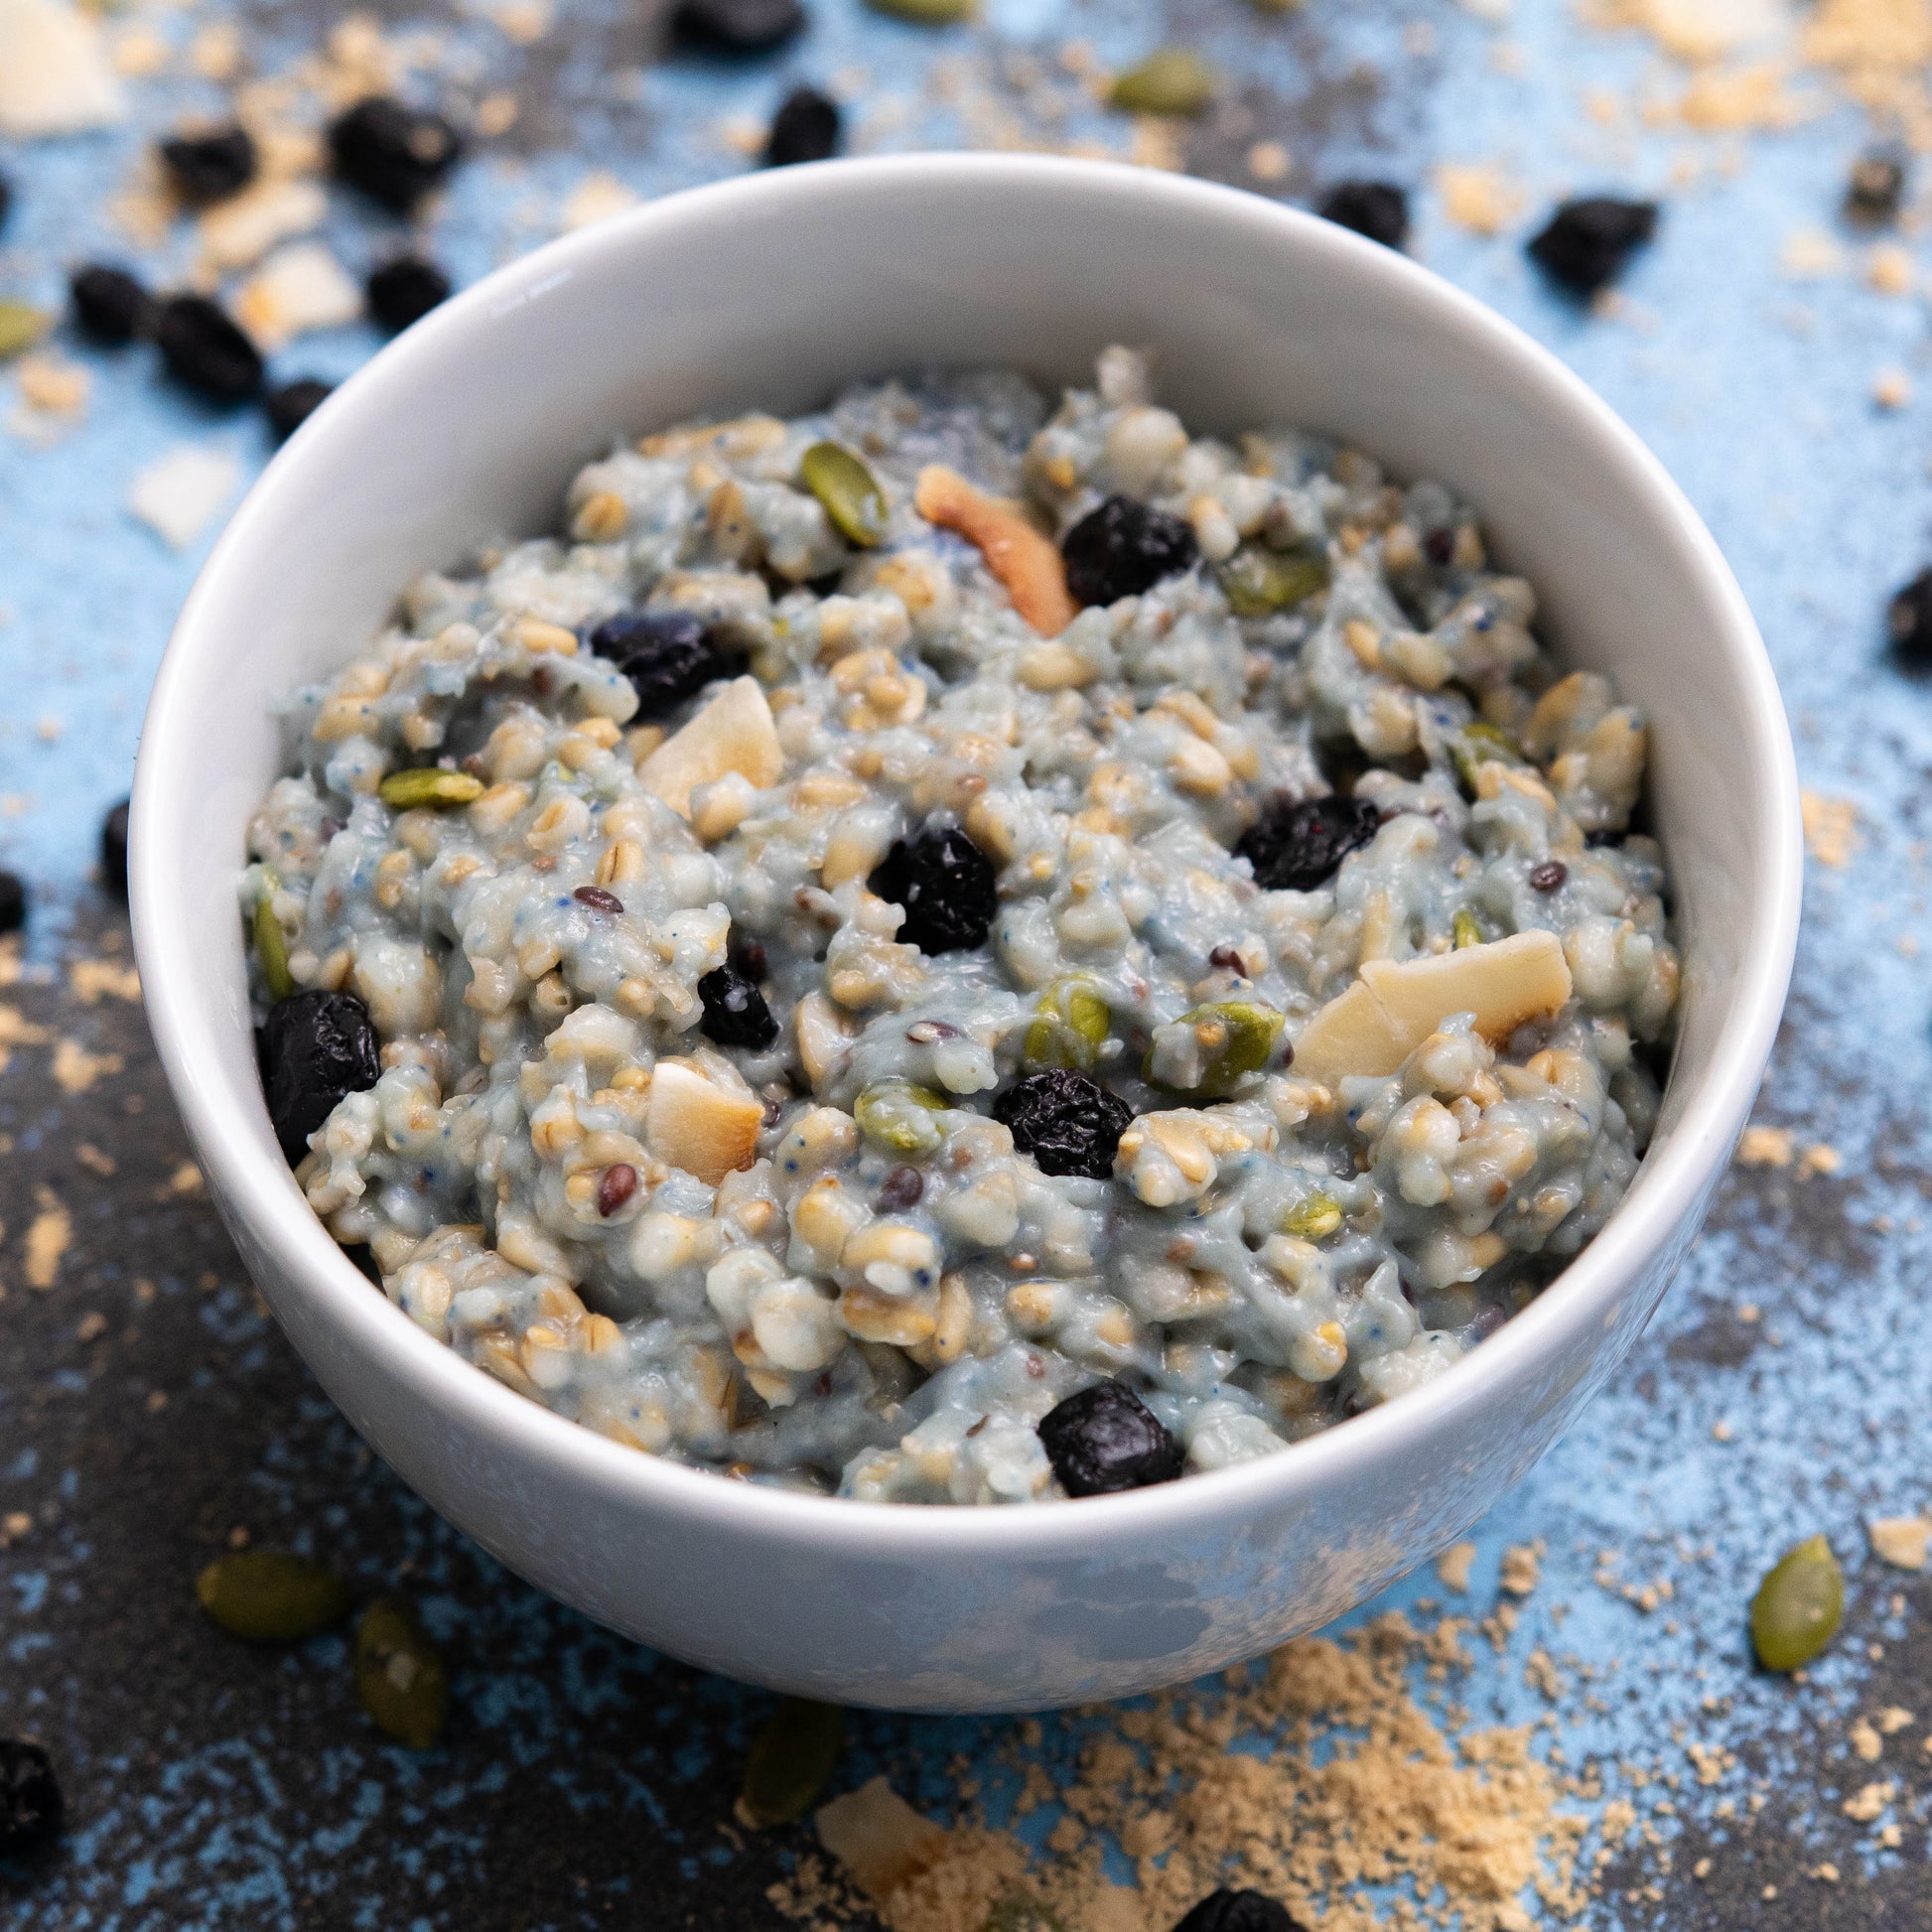 Blueberry & Coconut Oatmeal in Bowl - Eat Proper Good